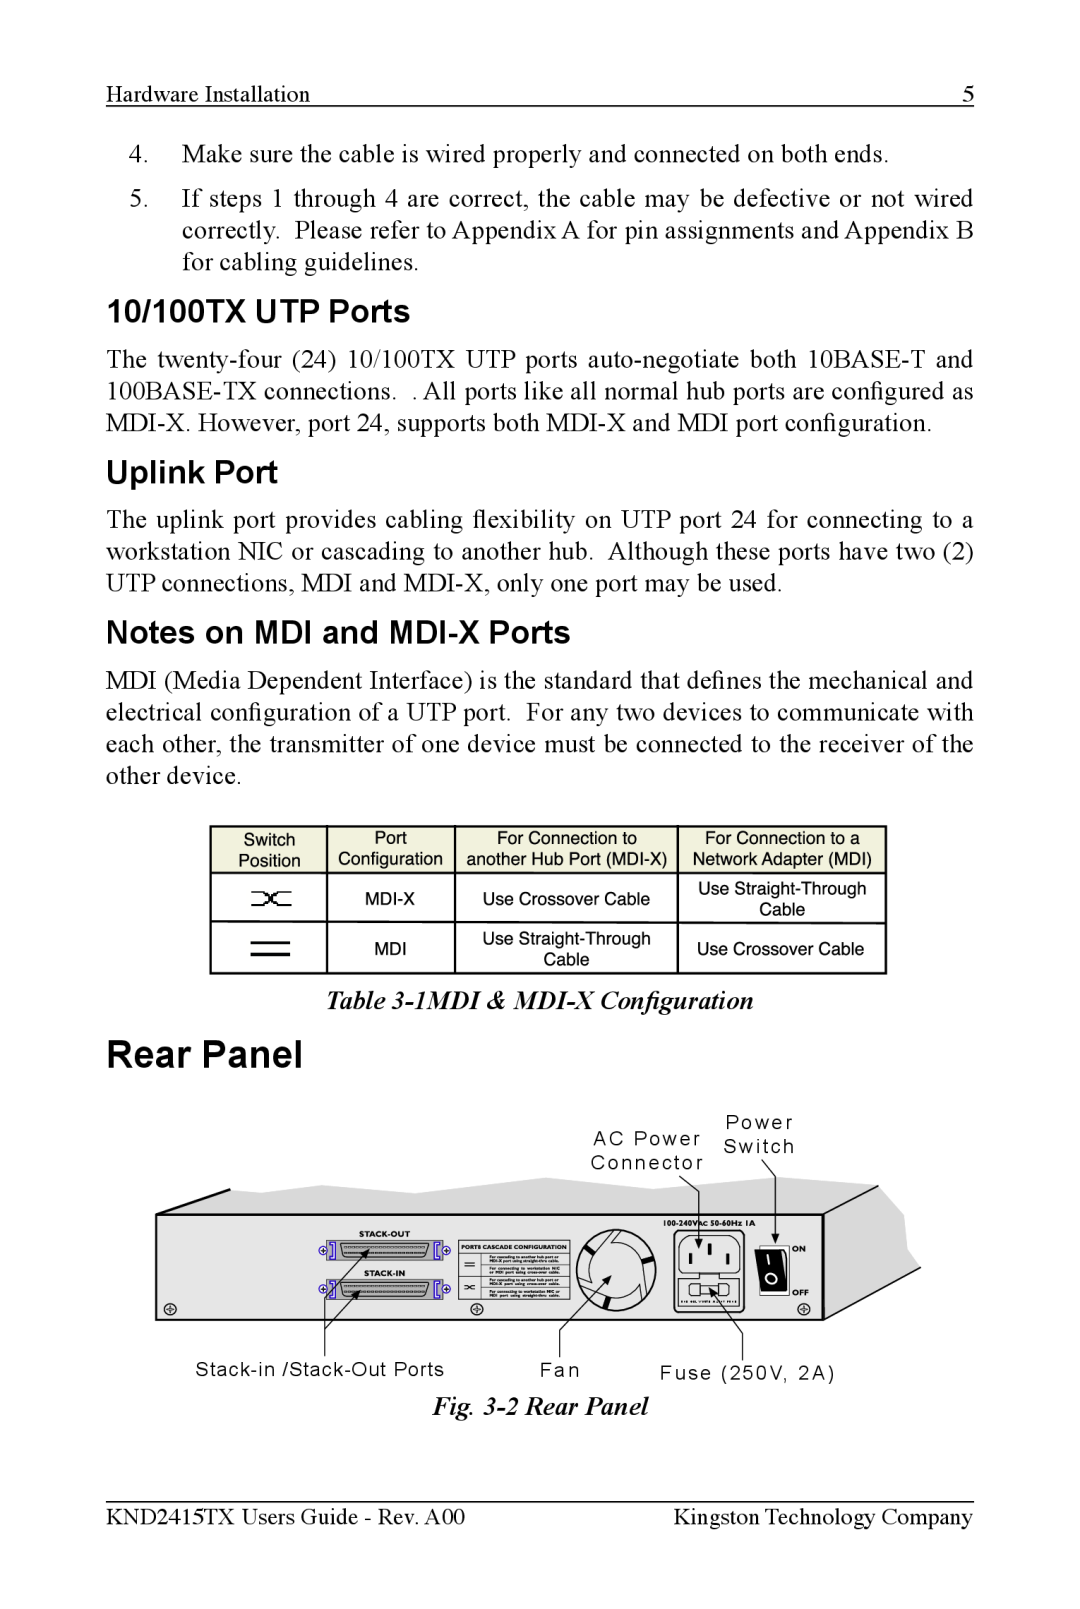 Kingston Technology KND2415TX manual 10/100TX UTP Ports, Uplink Port, Notes on MDI and MDI-X Ports, 2 Rear Panel 